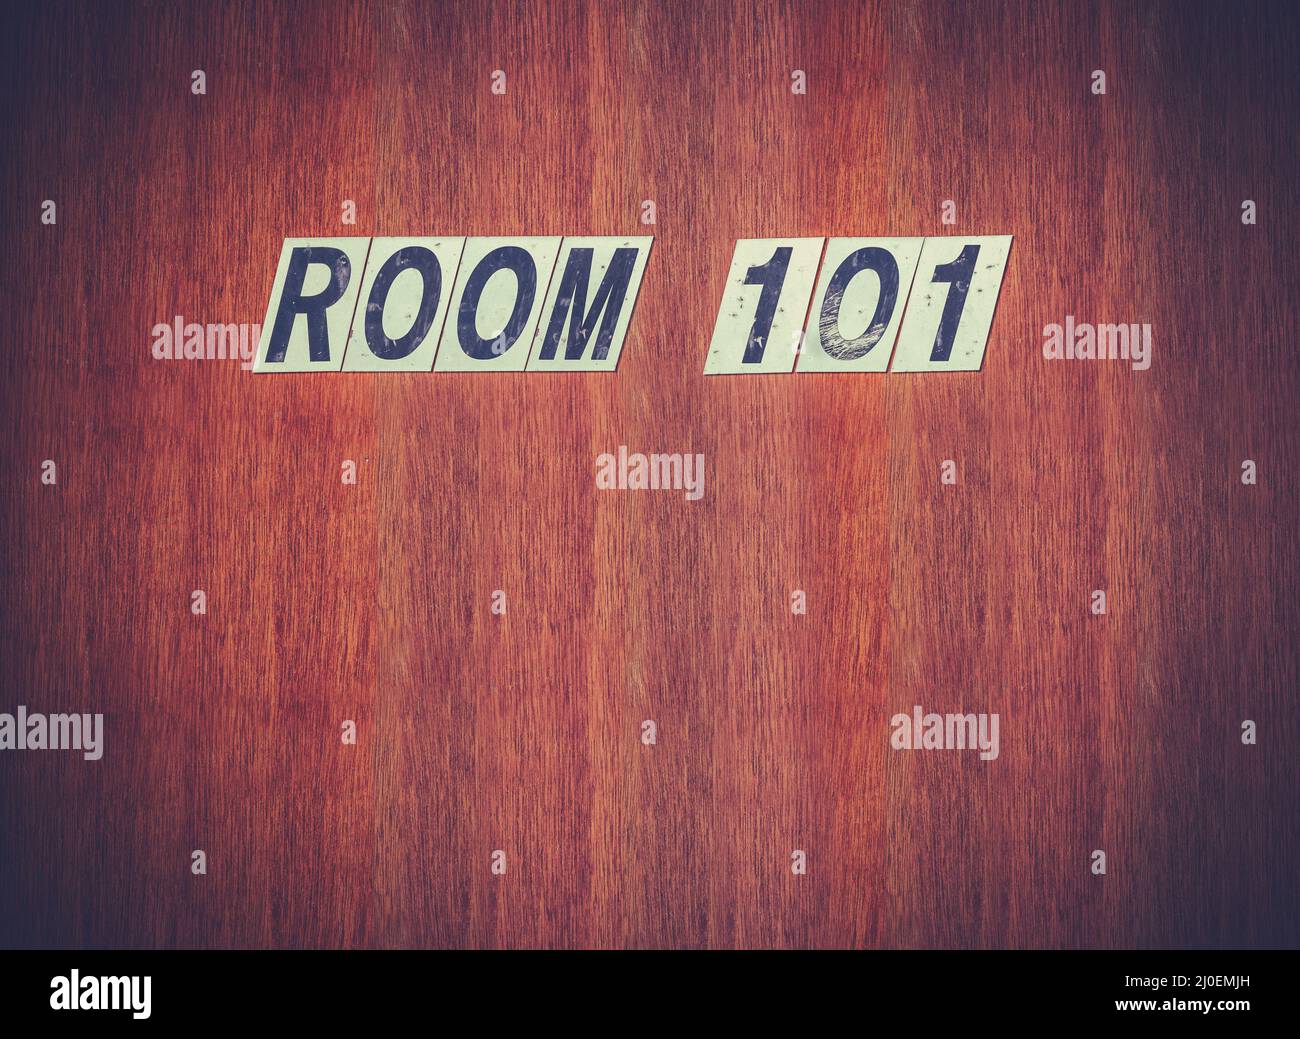 Room 101 Fear Concept Stock Photo